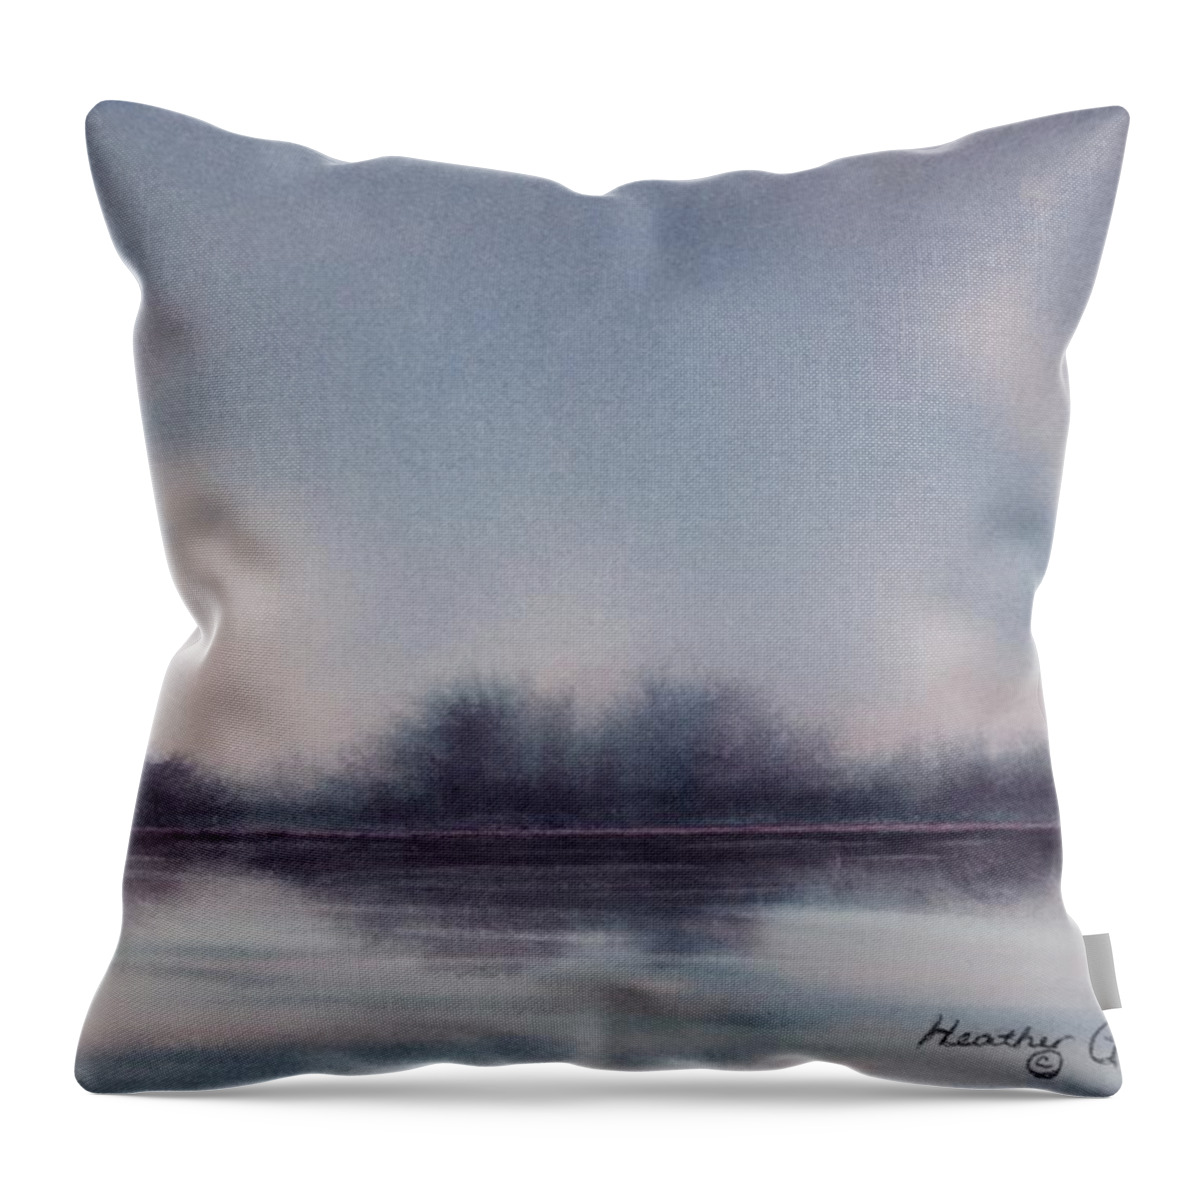 Landscape Throw Pillow featuring the painting Genie Effect by Heather Gallup